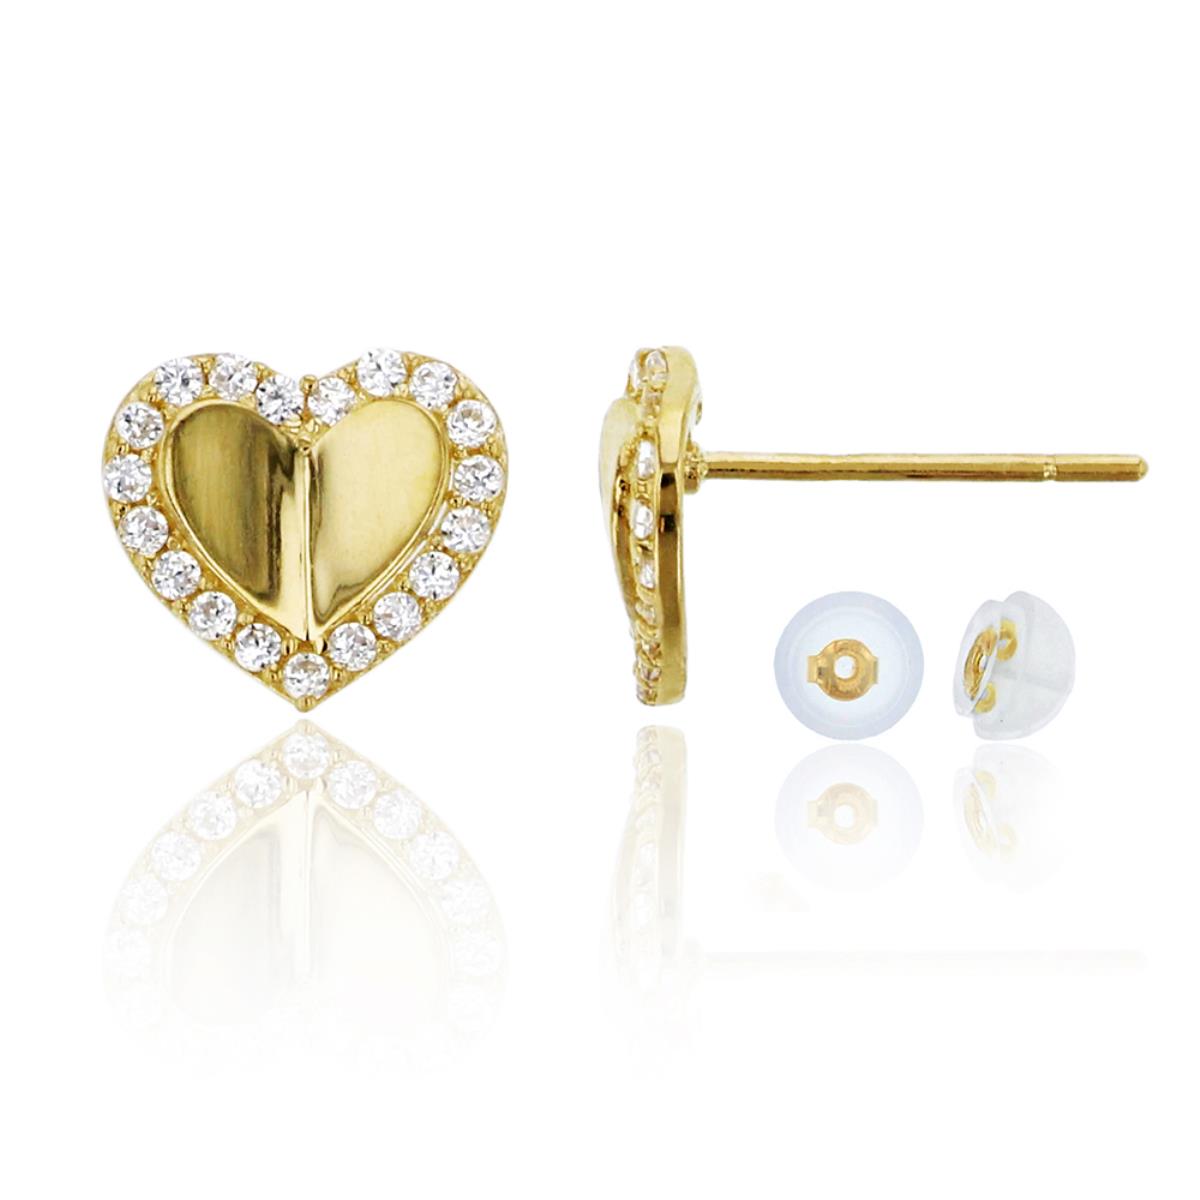 10K Yellow Gold High Polished Micropave Heart CZ Stud Earrings with Bubble Silicone Backs